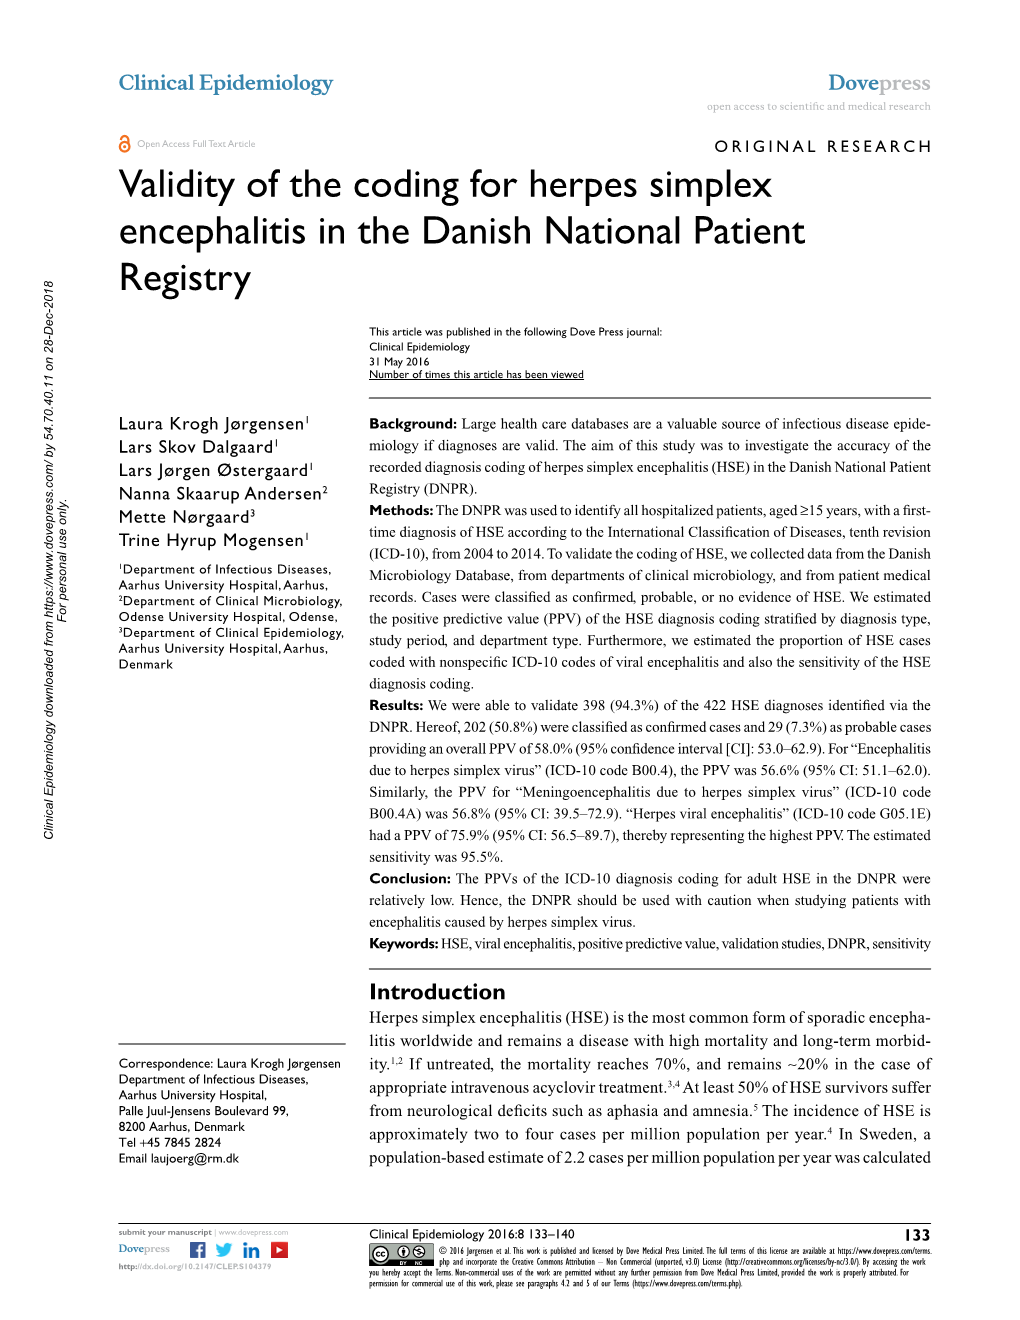 Validity of the Coding for Herpes Simplex Encephalitis in the Danish National Patient Registry